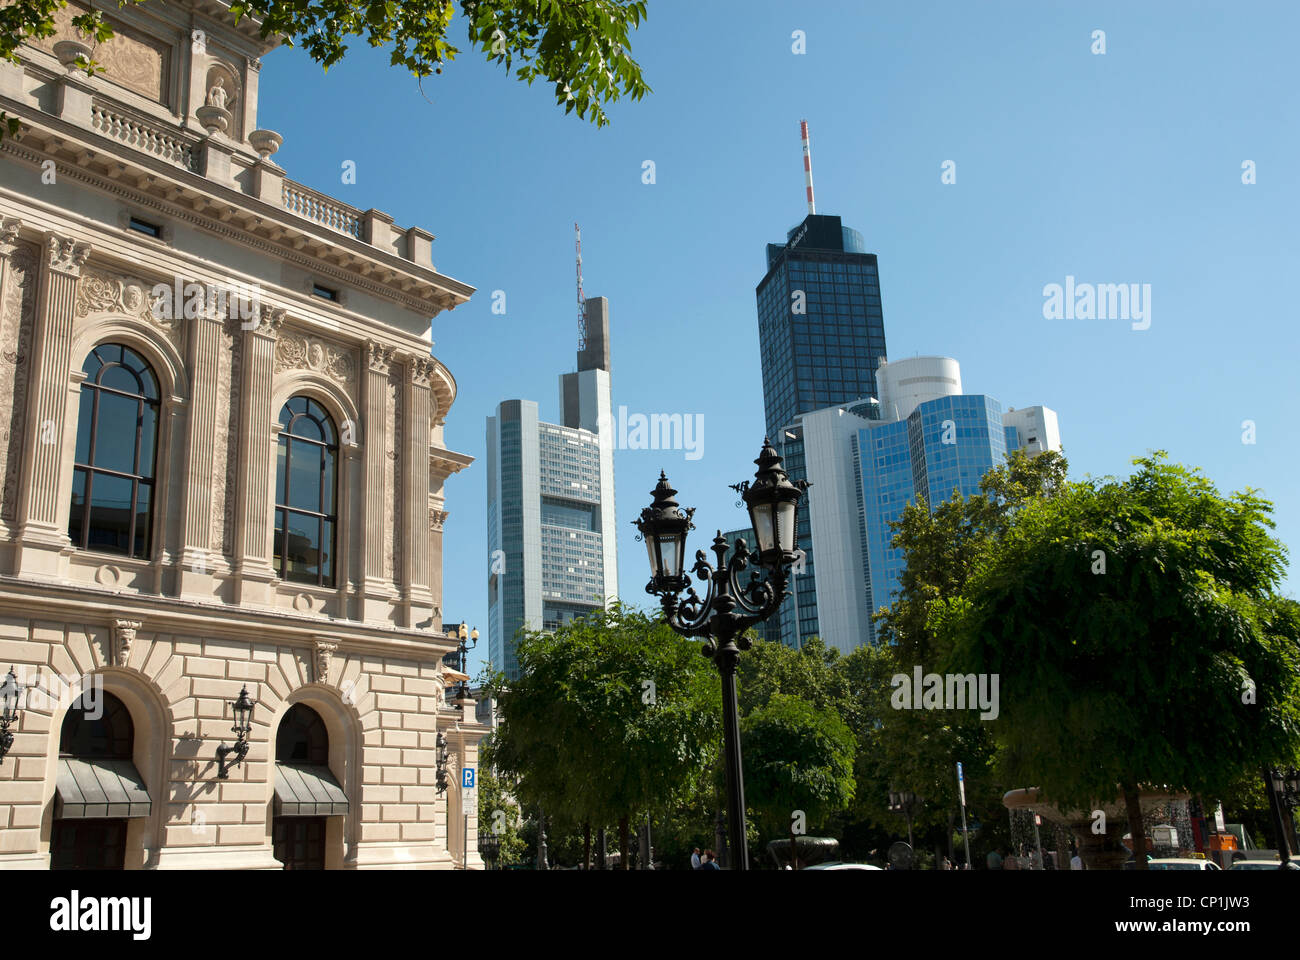 View from 'Alte Oper' to Commerzbank building and Main Tower in Frankfurt, Germany Stock Photo